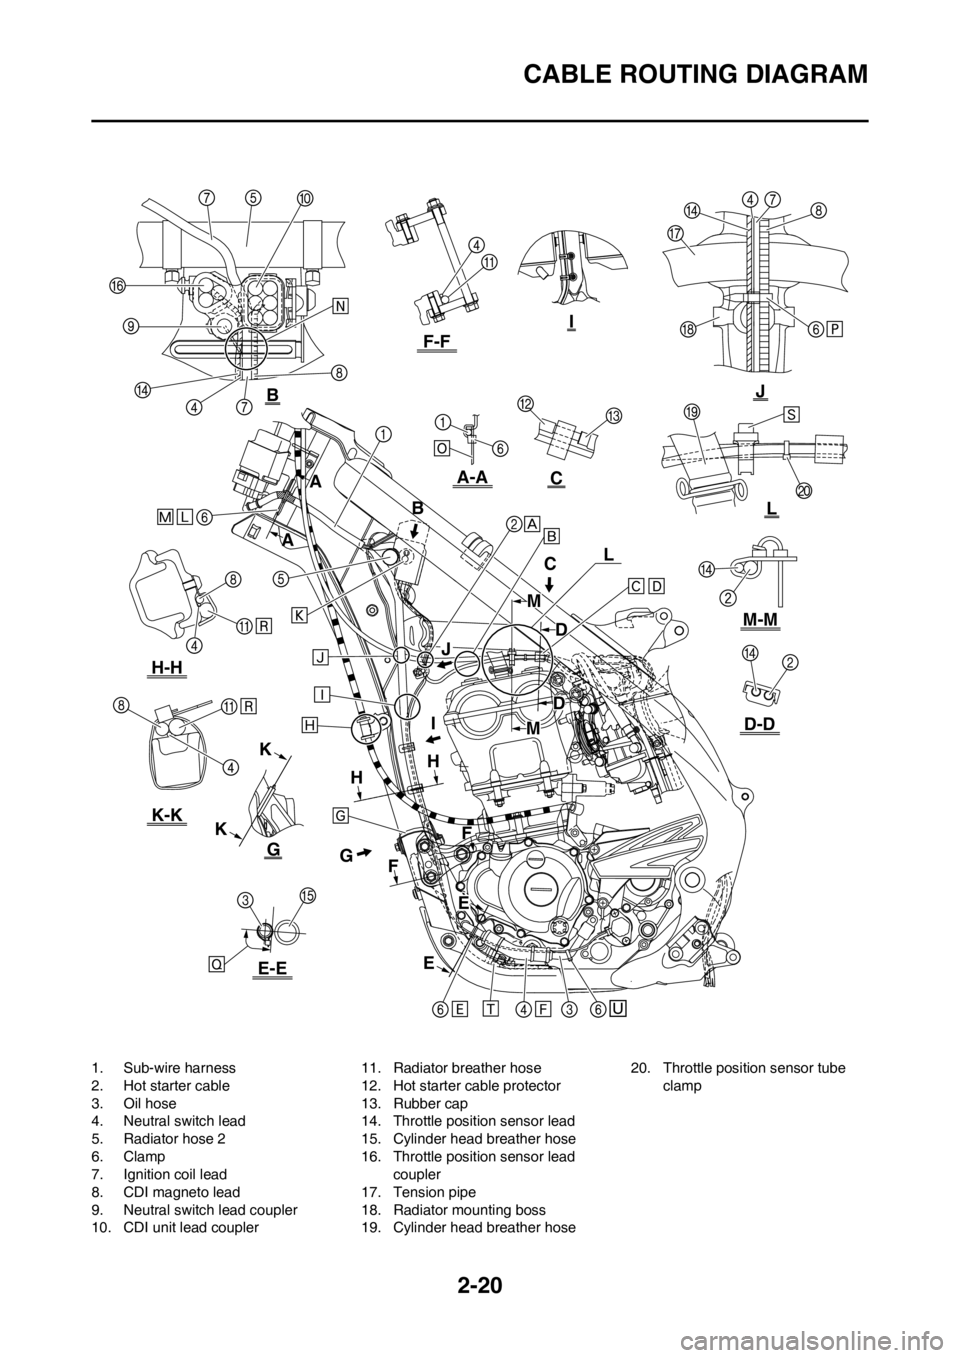 YAMAHA YZ250F 2012  Owners Manual 2-20
CABLE ROUTING DIAGRAM
1. Sub-wire harness
2. Hot starter cable
3. Oil hose
4. Neutral switch lead
5. Radiator hose 2
6. Clamp
7. Ignition coil lead
8. CDI magneto lead
9. Neutral switch lead coup